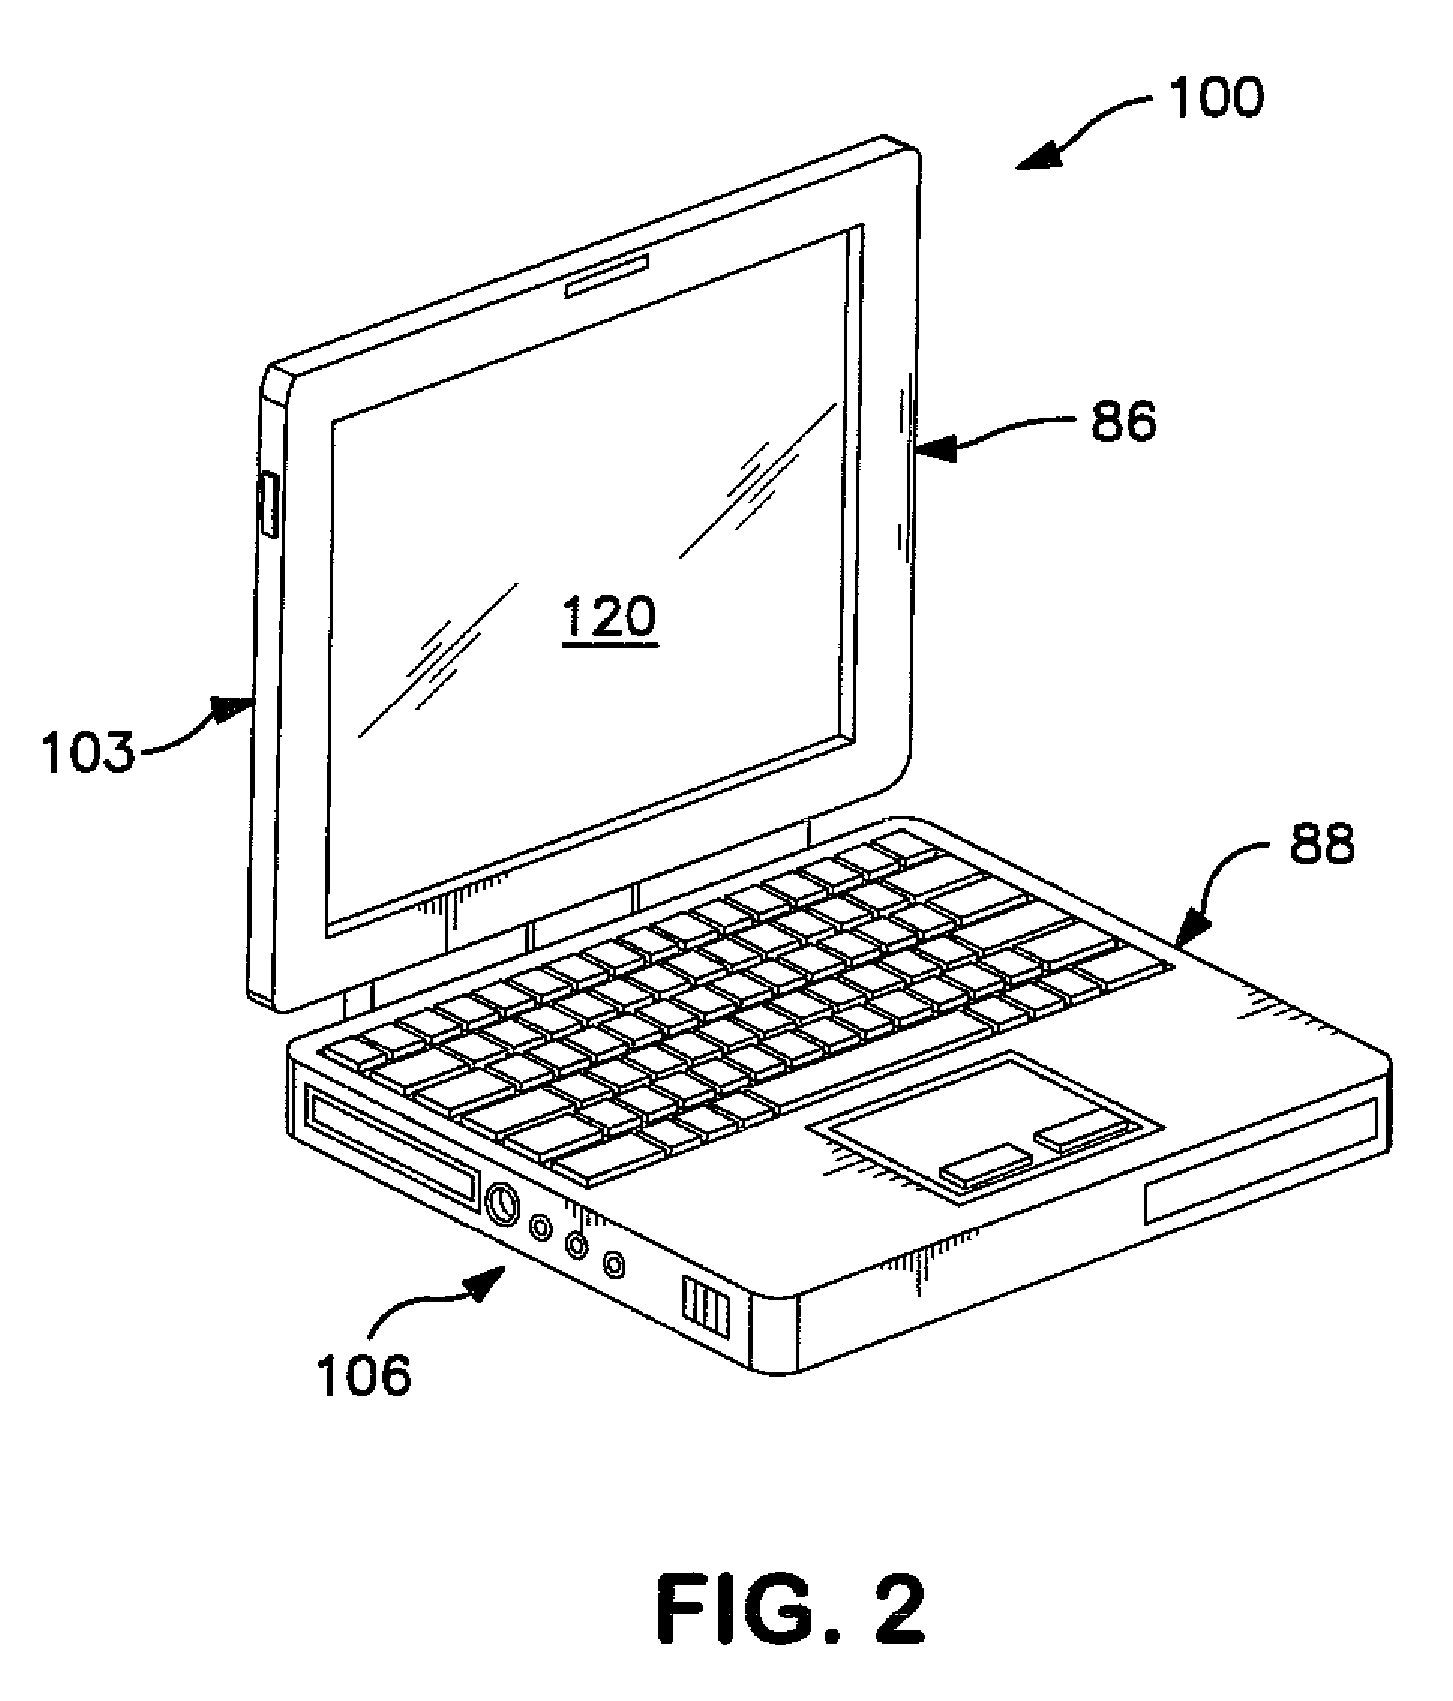 Housing for a portable electronic device